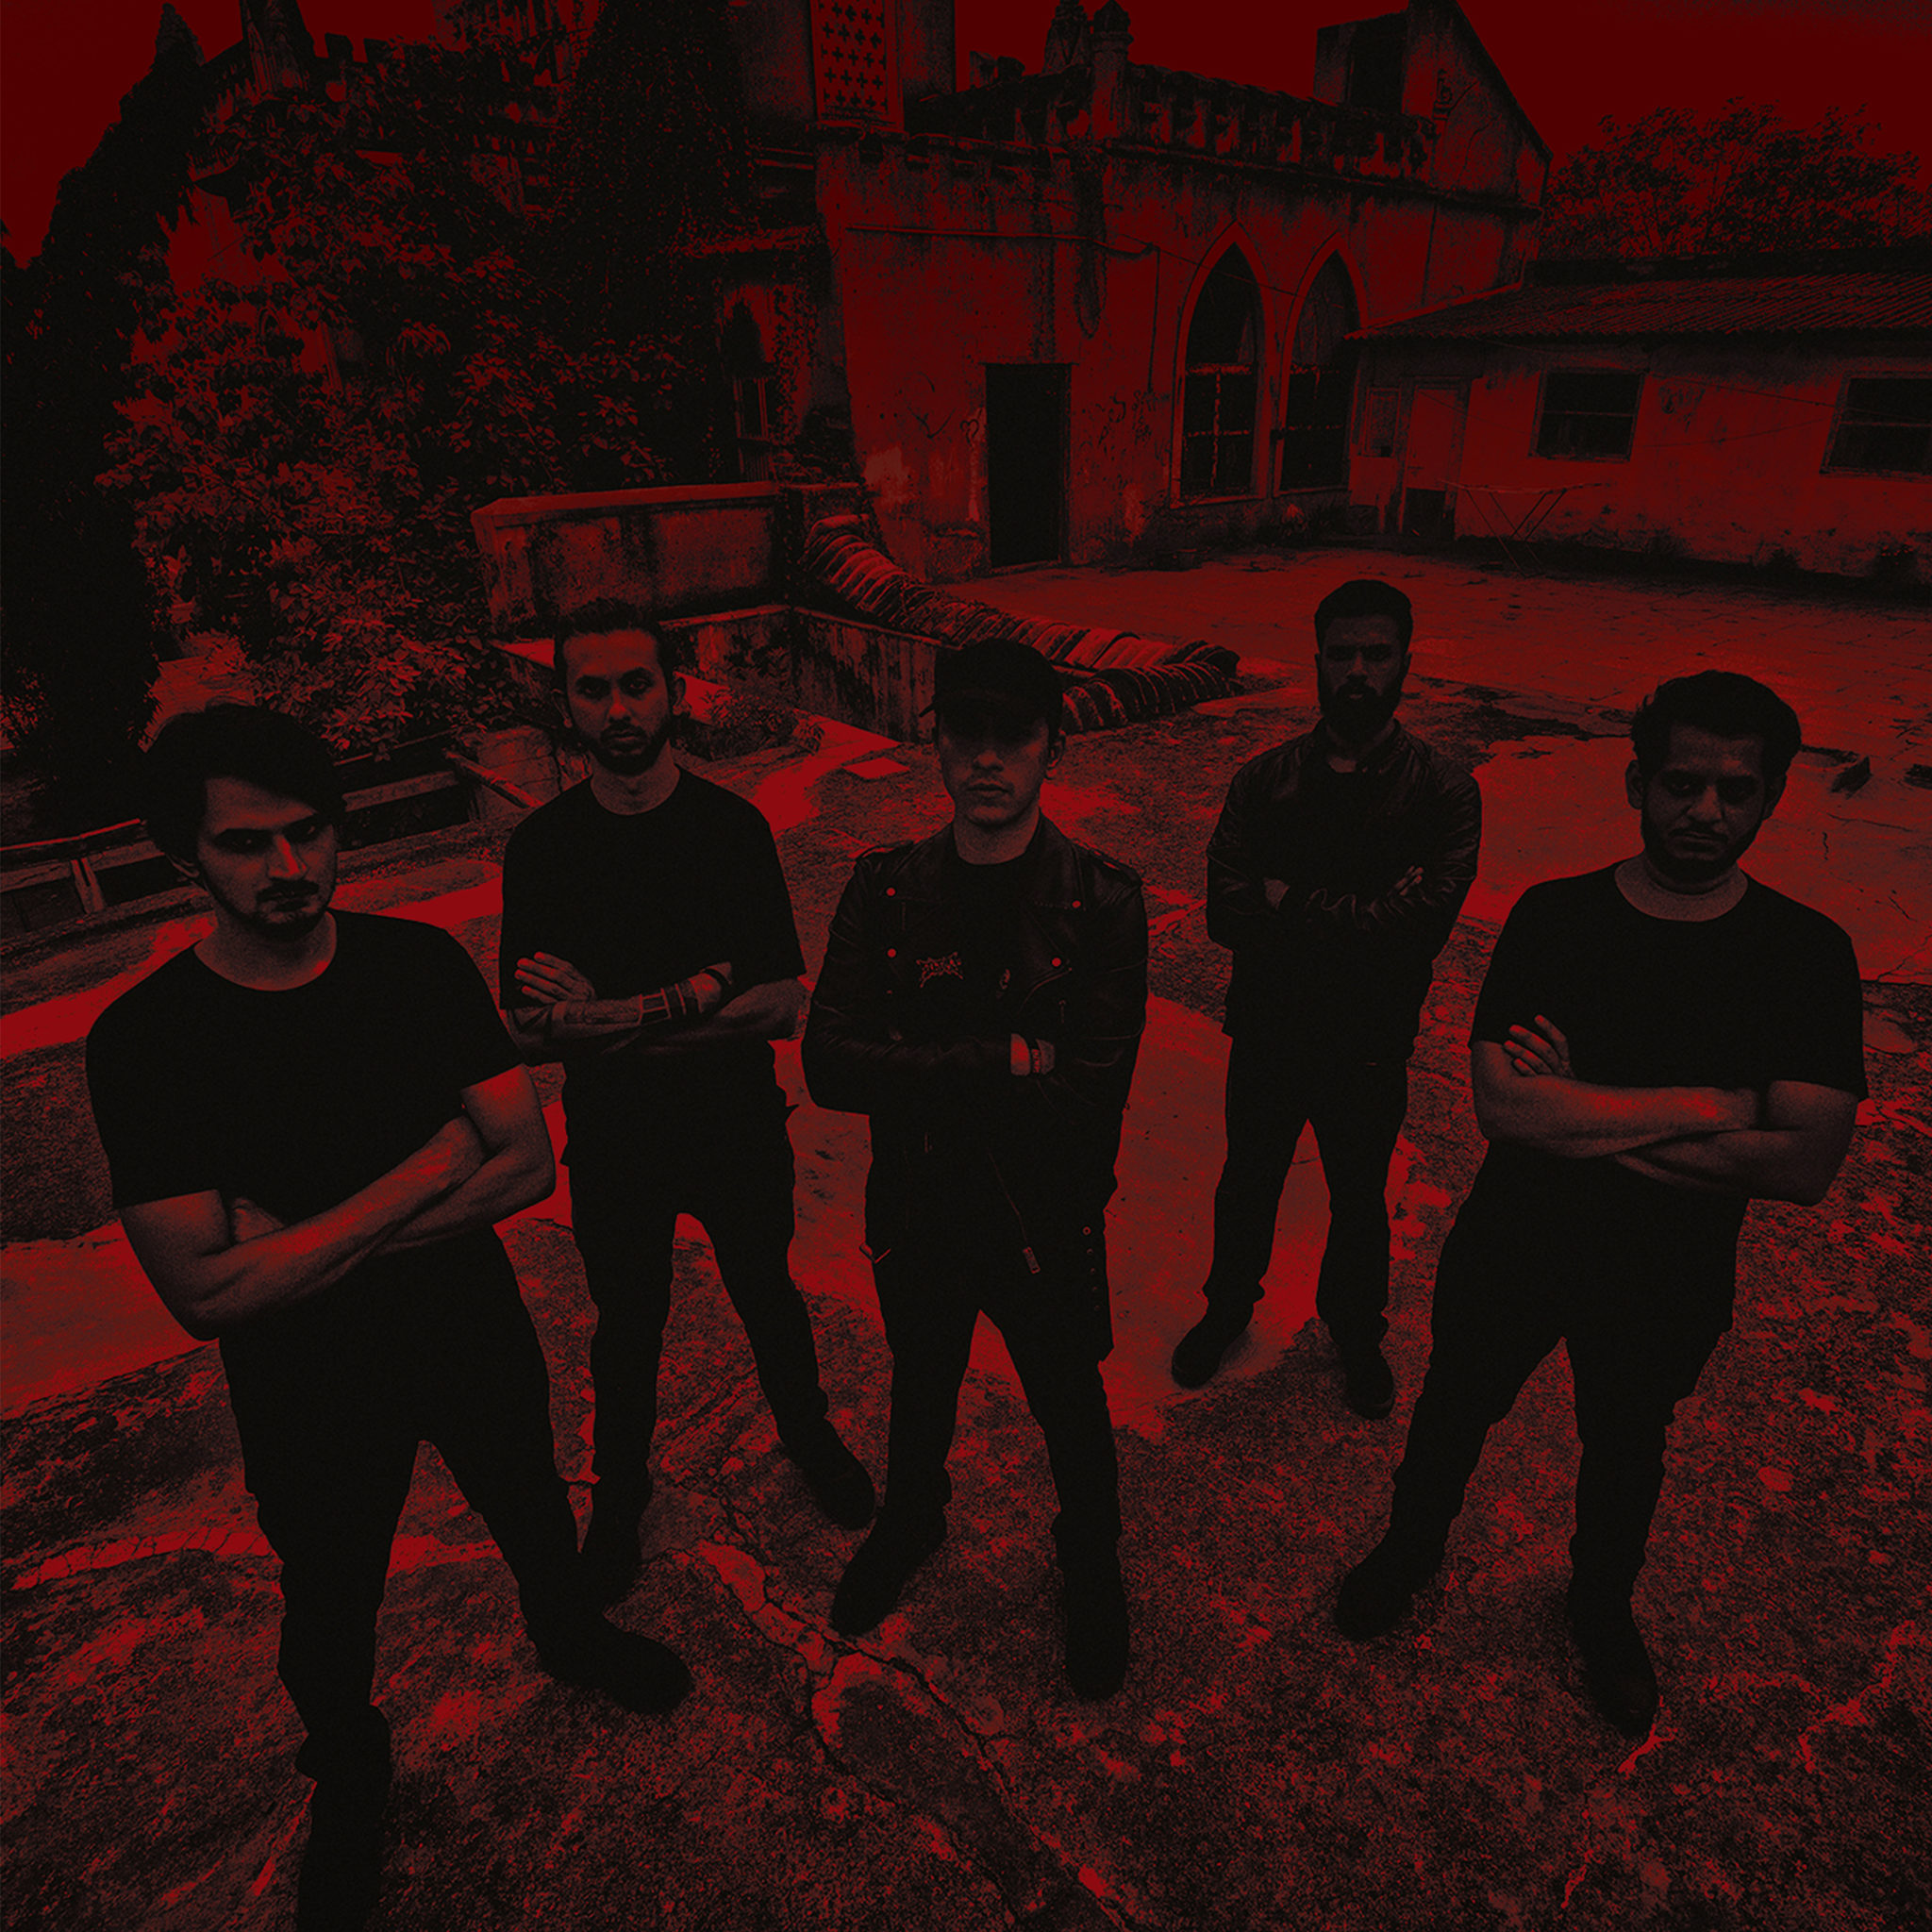 GODLESS: Hyderabad, India Death Metal Outfit Confirms Record Launch Shows, Signature Beer, And More; Debut LP, States Of Chaos, To See Release Next Week